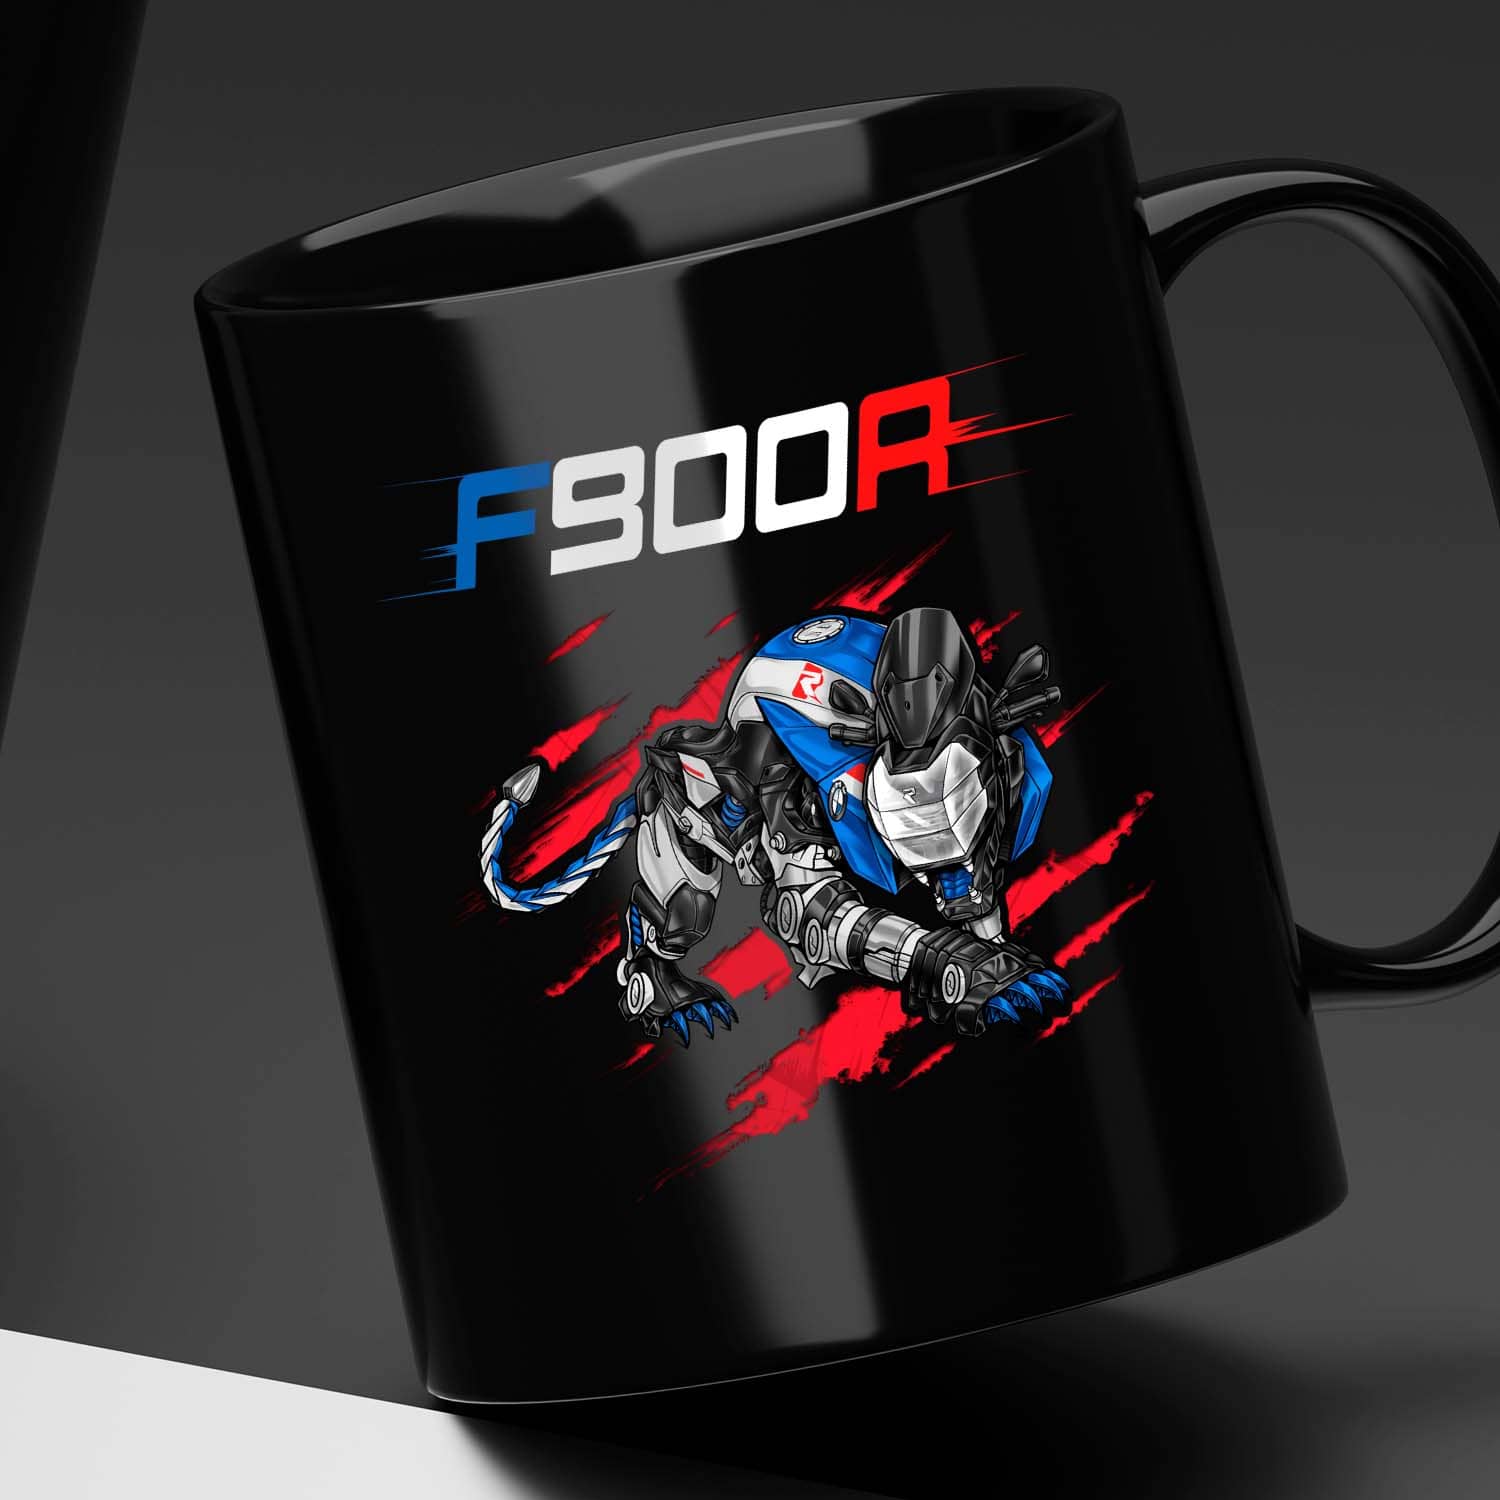 Mug BMW F900R Panther for Motorcycle Riders